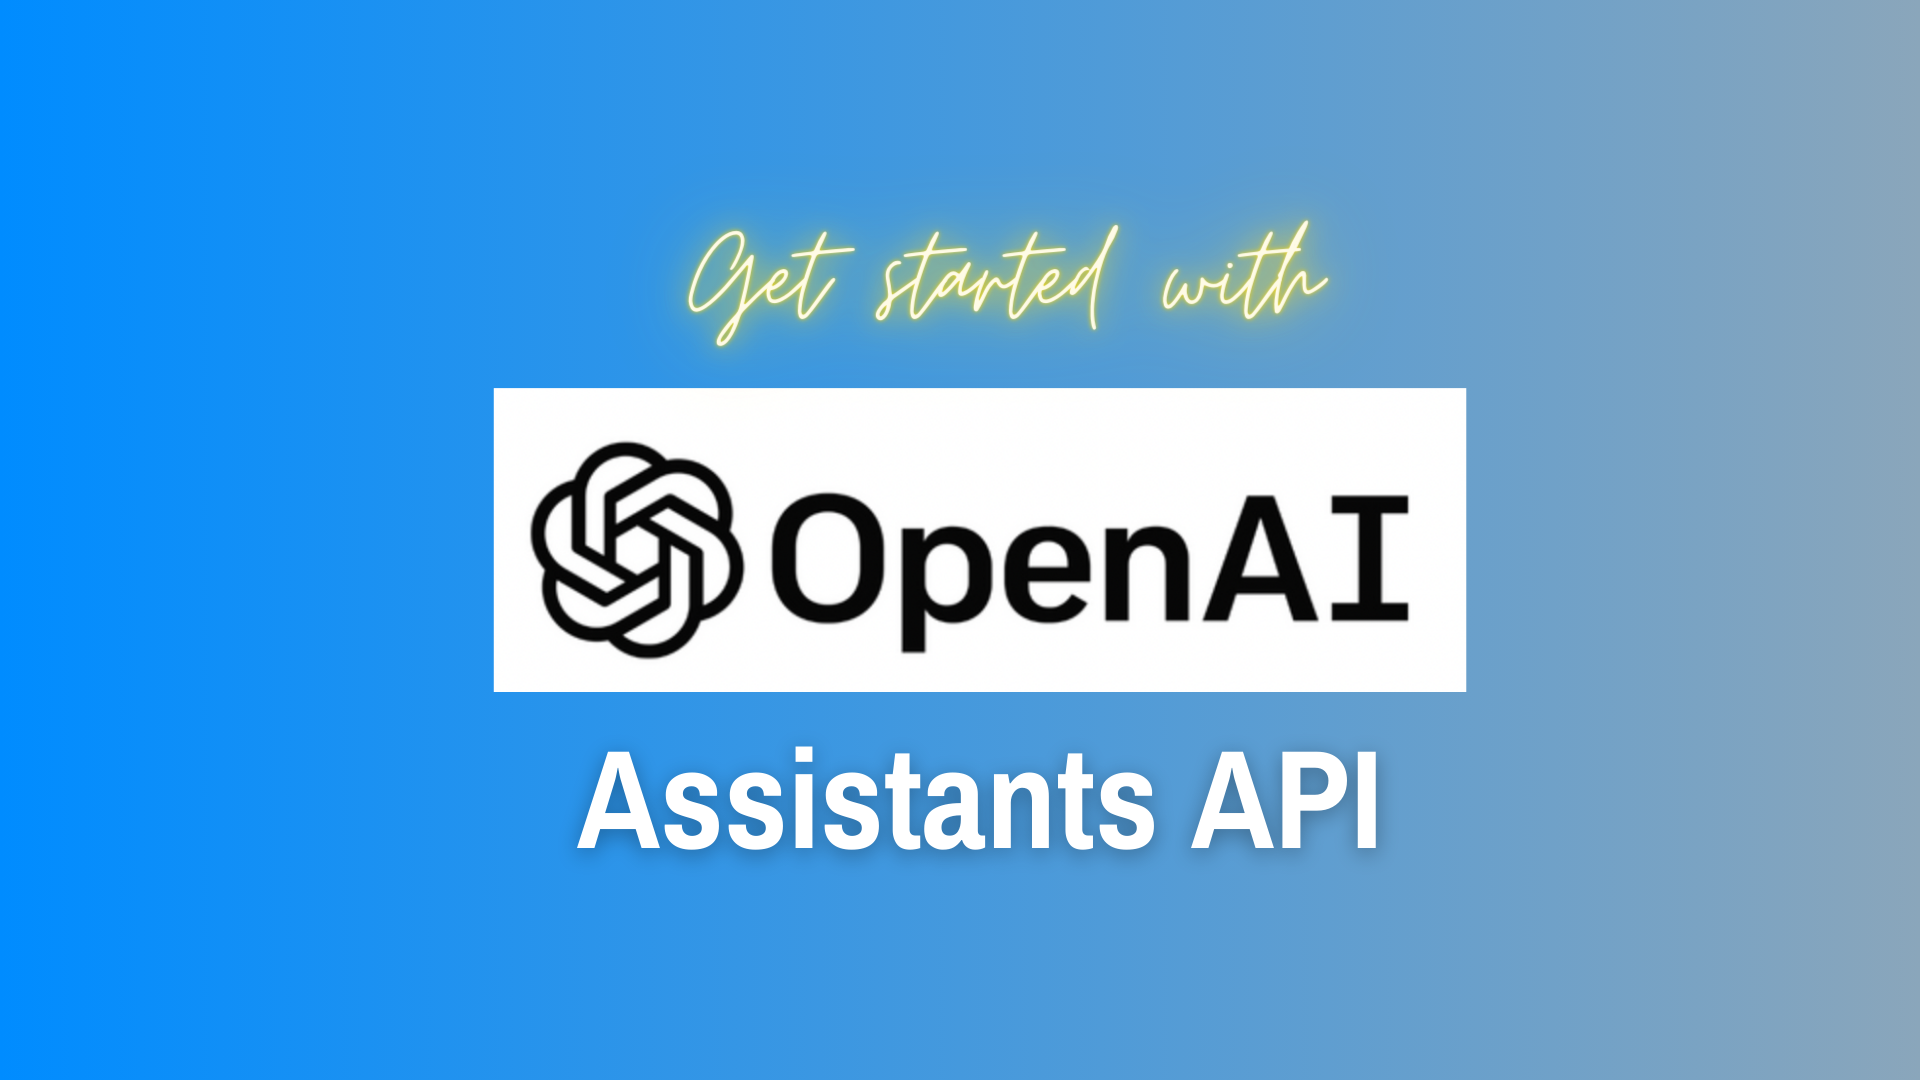 Get started with OpenAI Assistants API with logo on blended blue background.